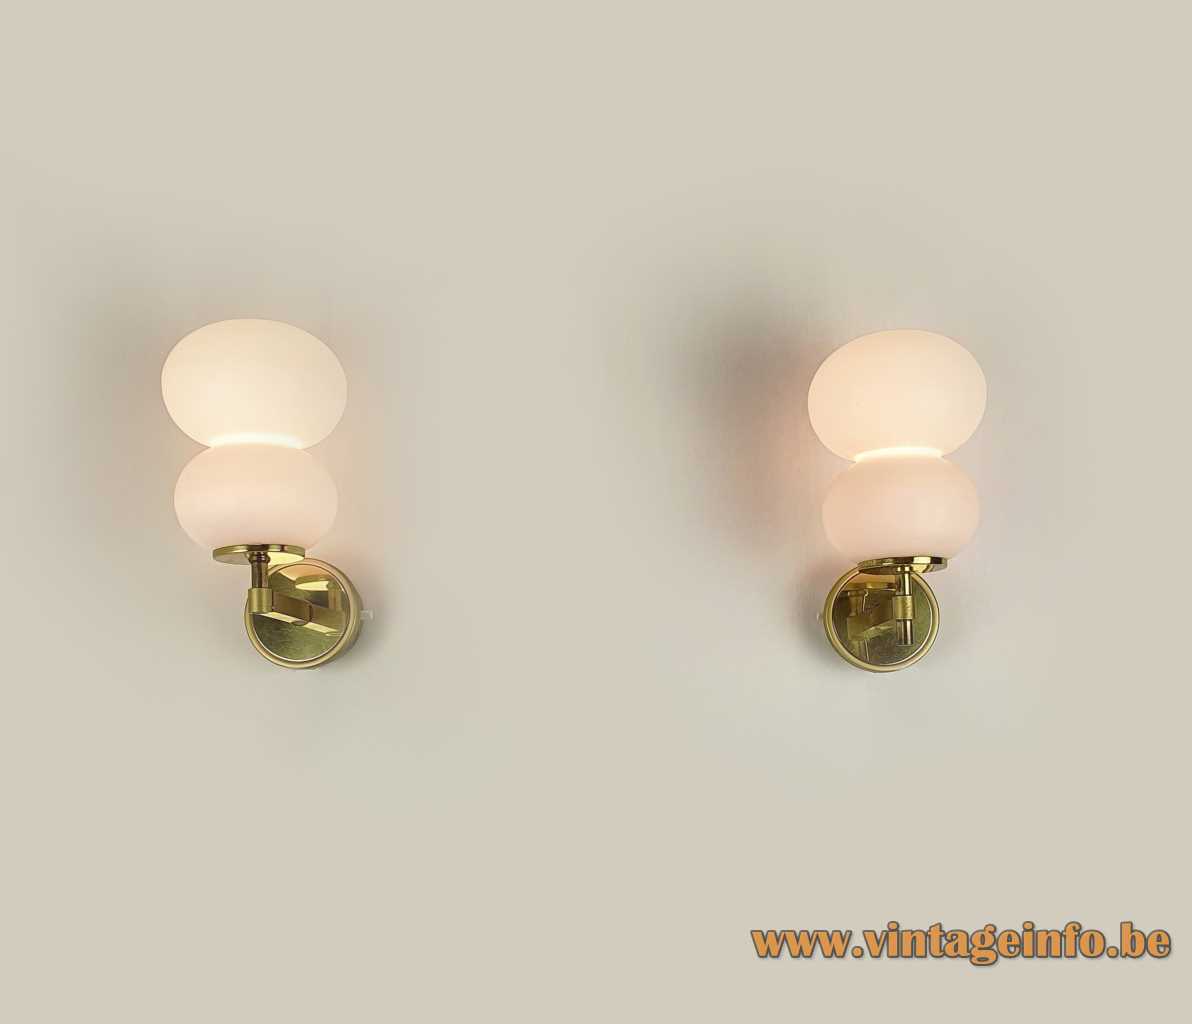 DORIA pumpkin wall lamps white opal glass lampshades brass wall mount & rod 1960s 1970s Germany